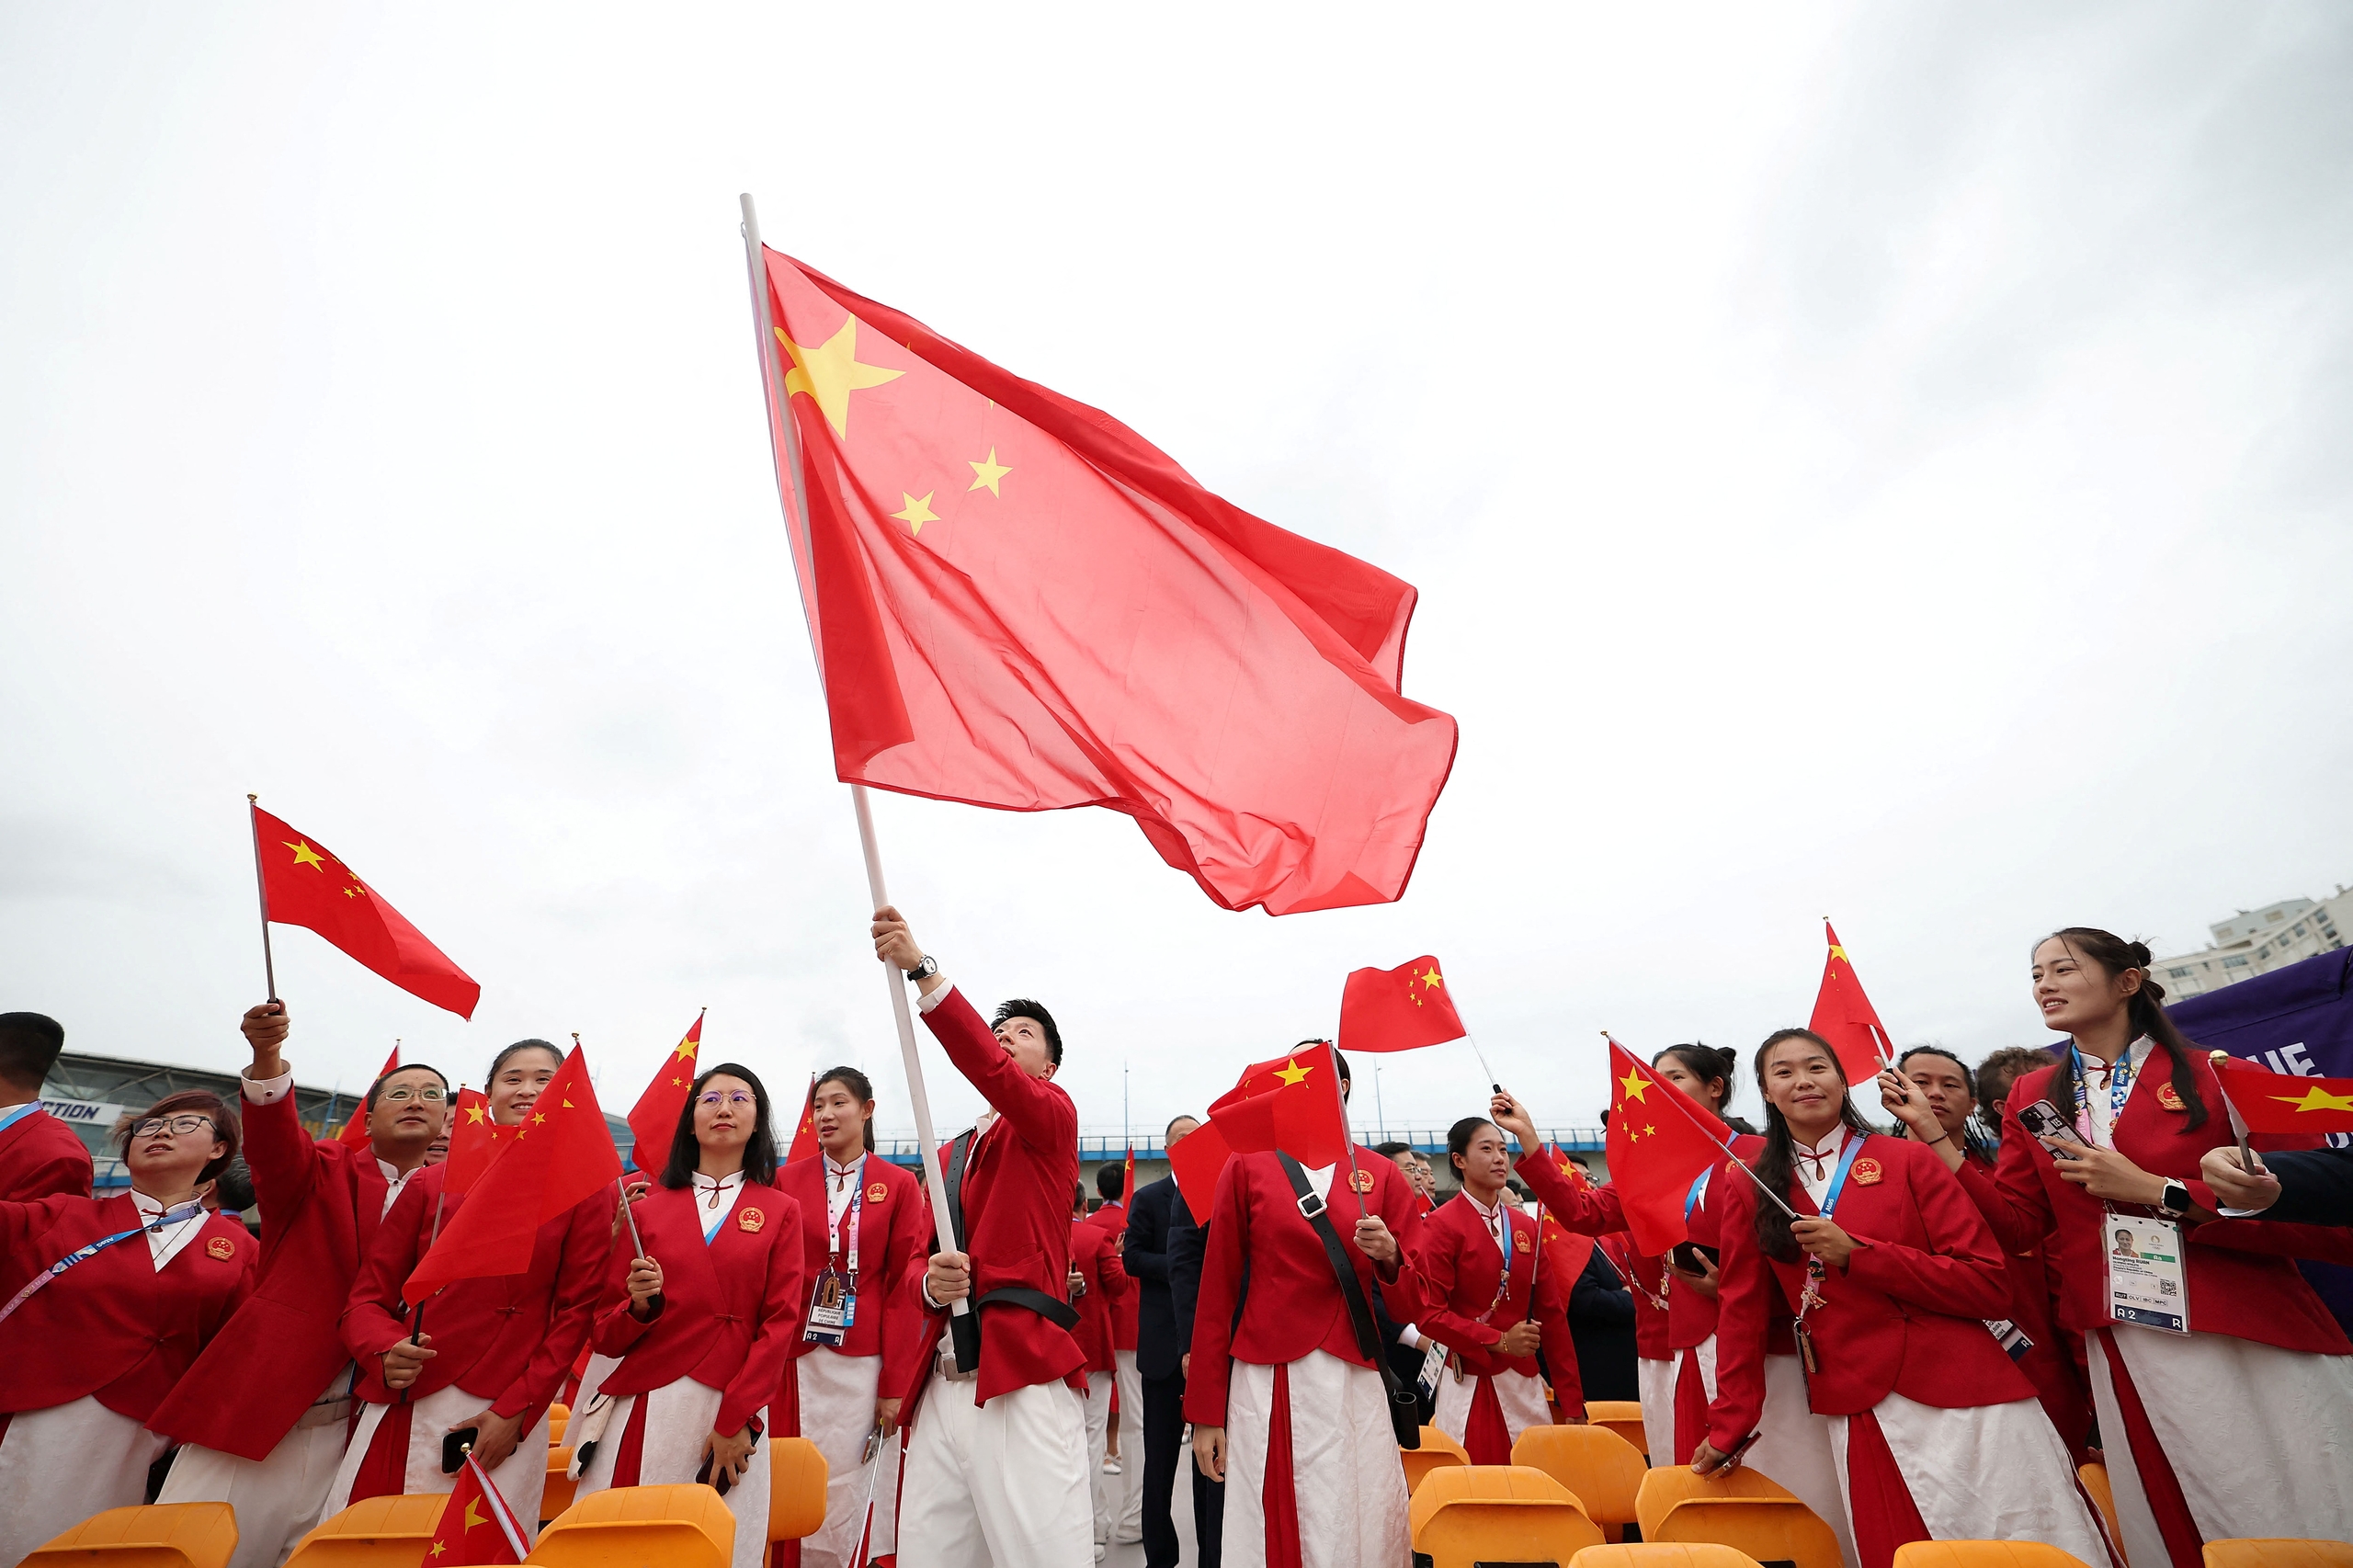 Members of the Chinese delegation are seen at the opening ceremony of the Paris 2024 Olympic Games on July 26. /IC